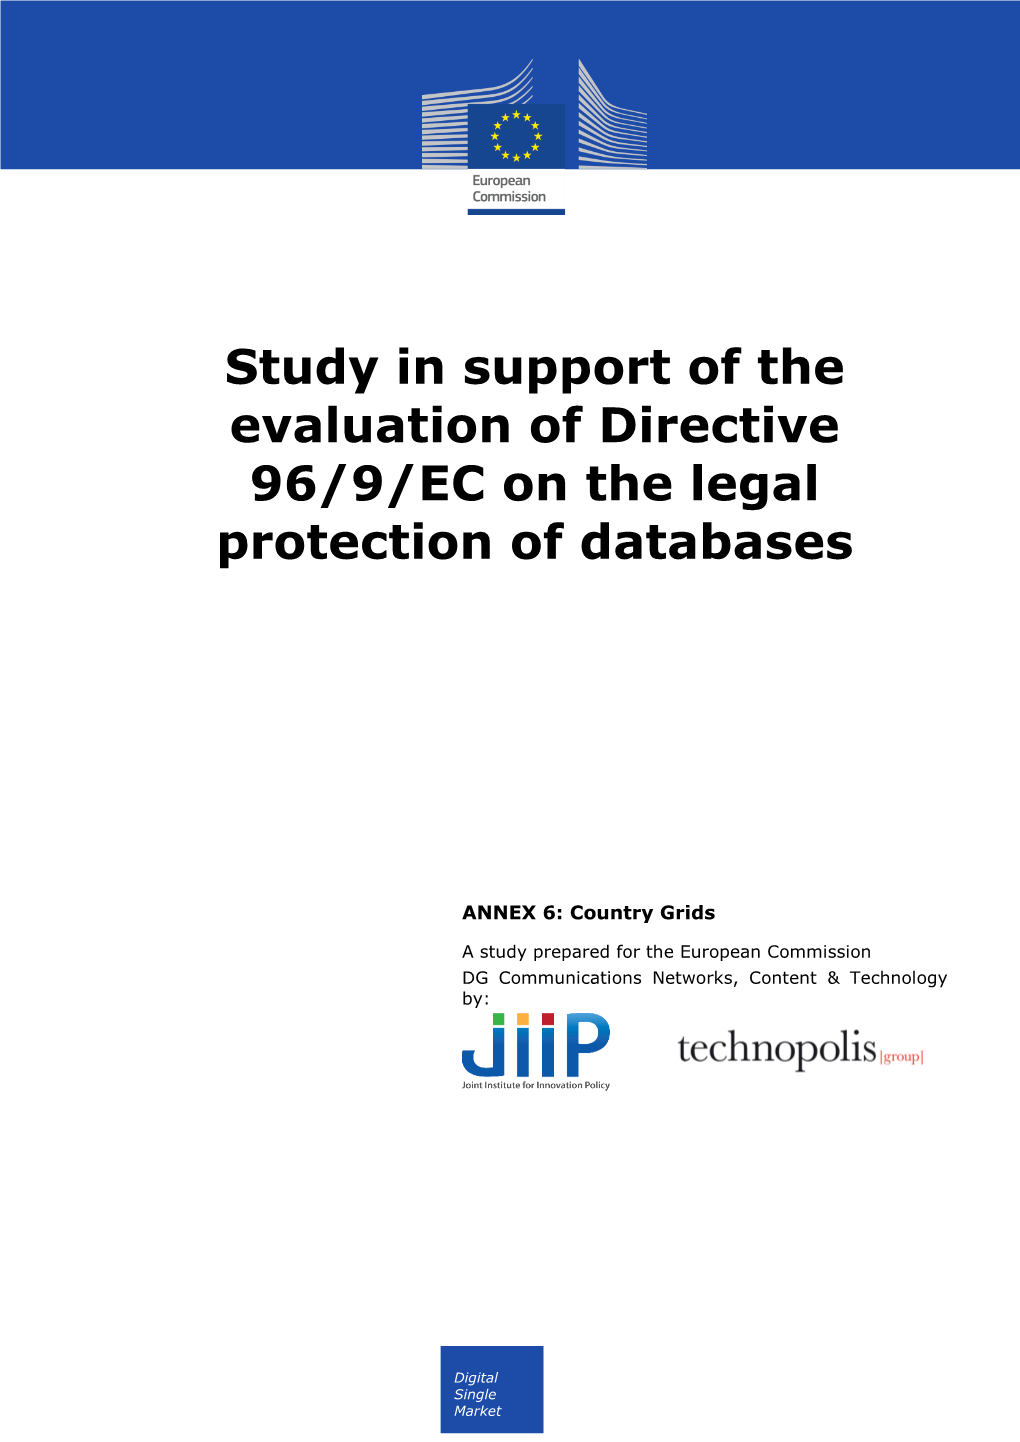 Study in Support of the Evaluation of Directive 96/9/EC on the Legal Protection of Databases